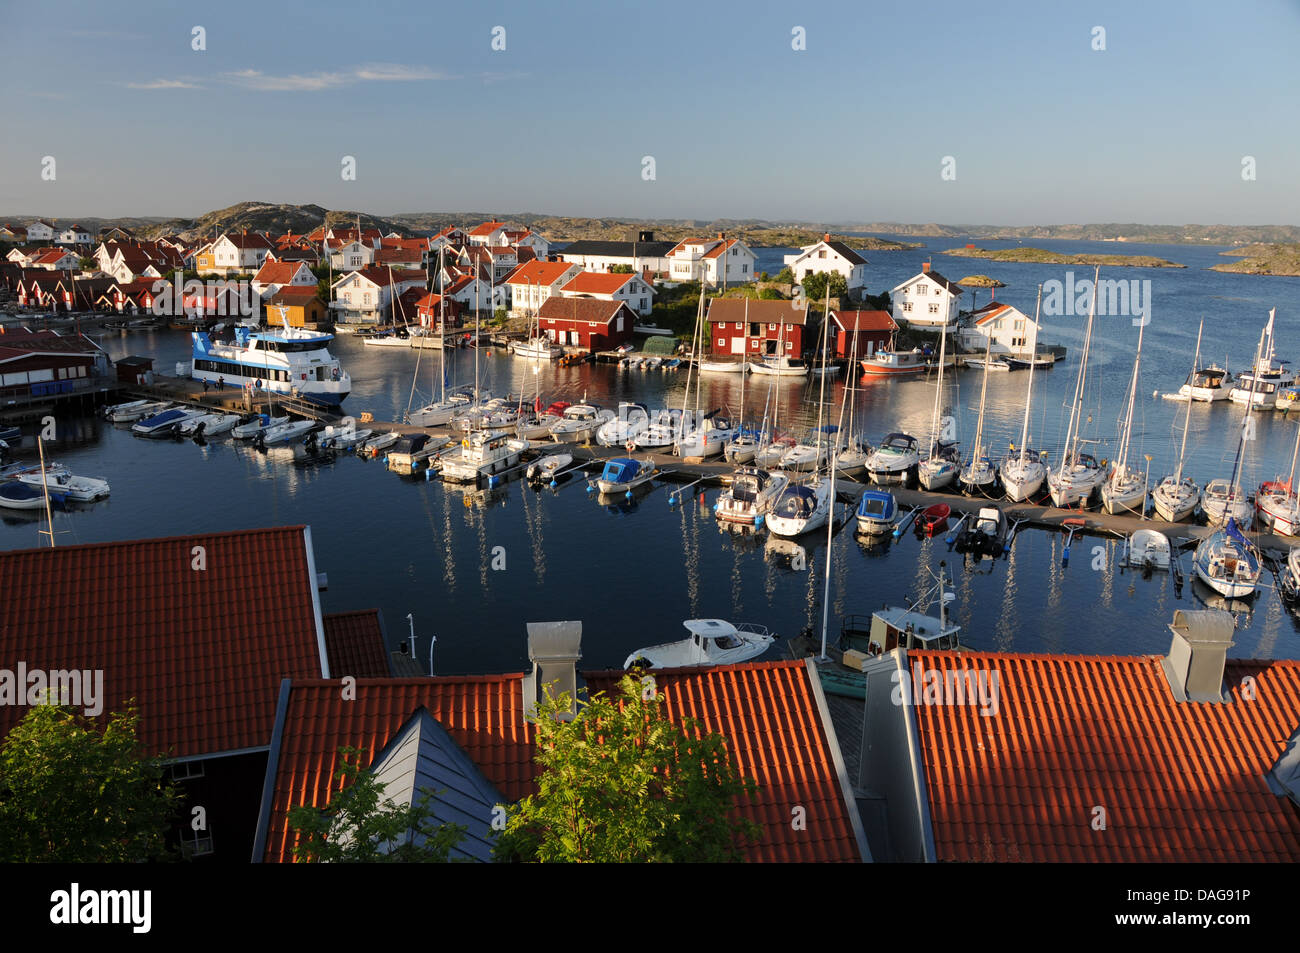 Small harbor filled with boats, yachts, and colorful homes on island of Gullholmen in Bohuslän on West Coast of Sweden Stock Photo